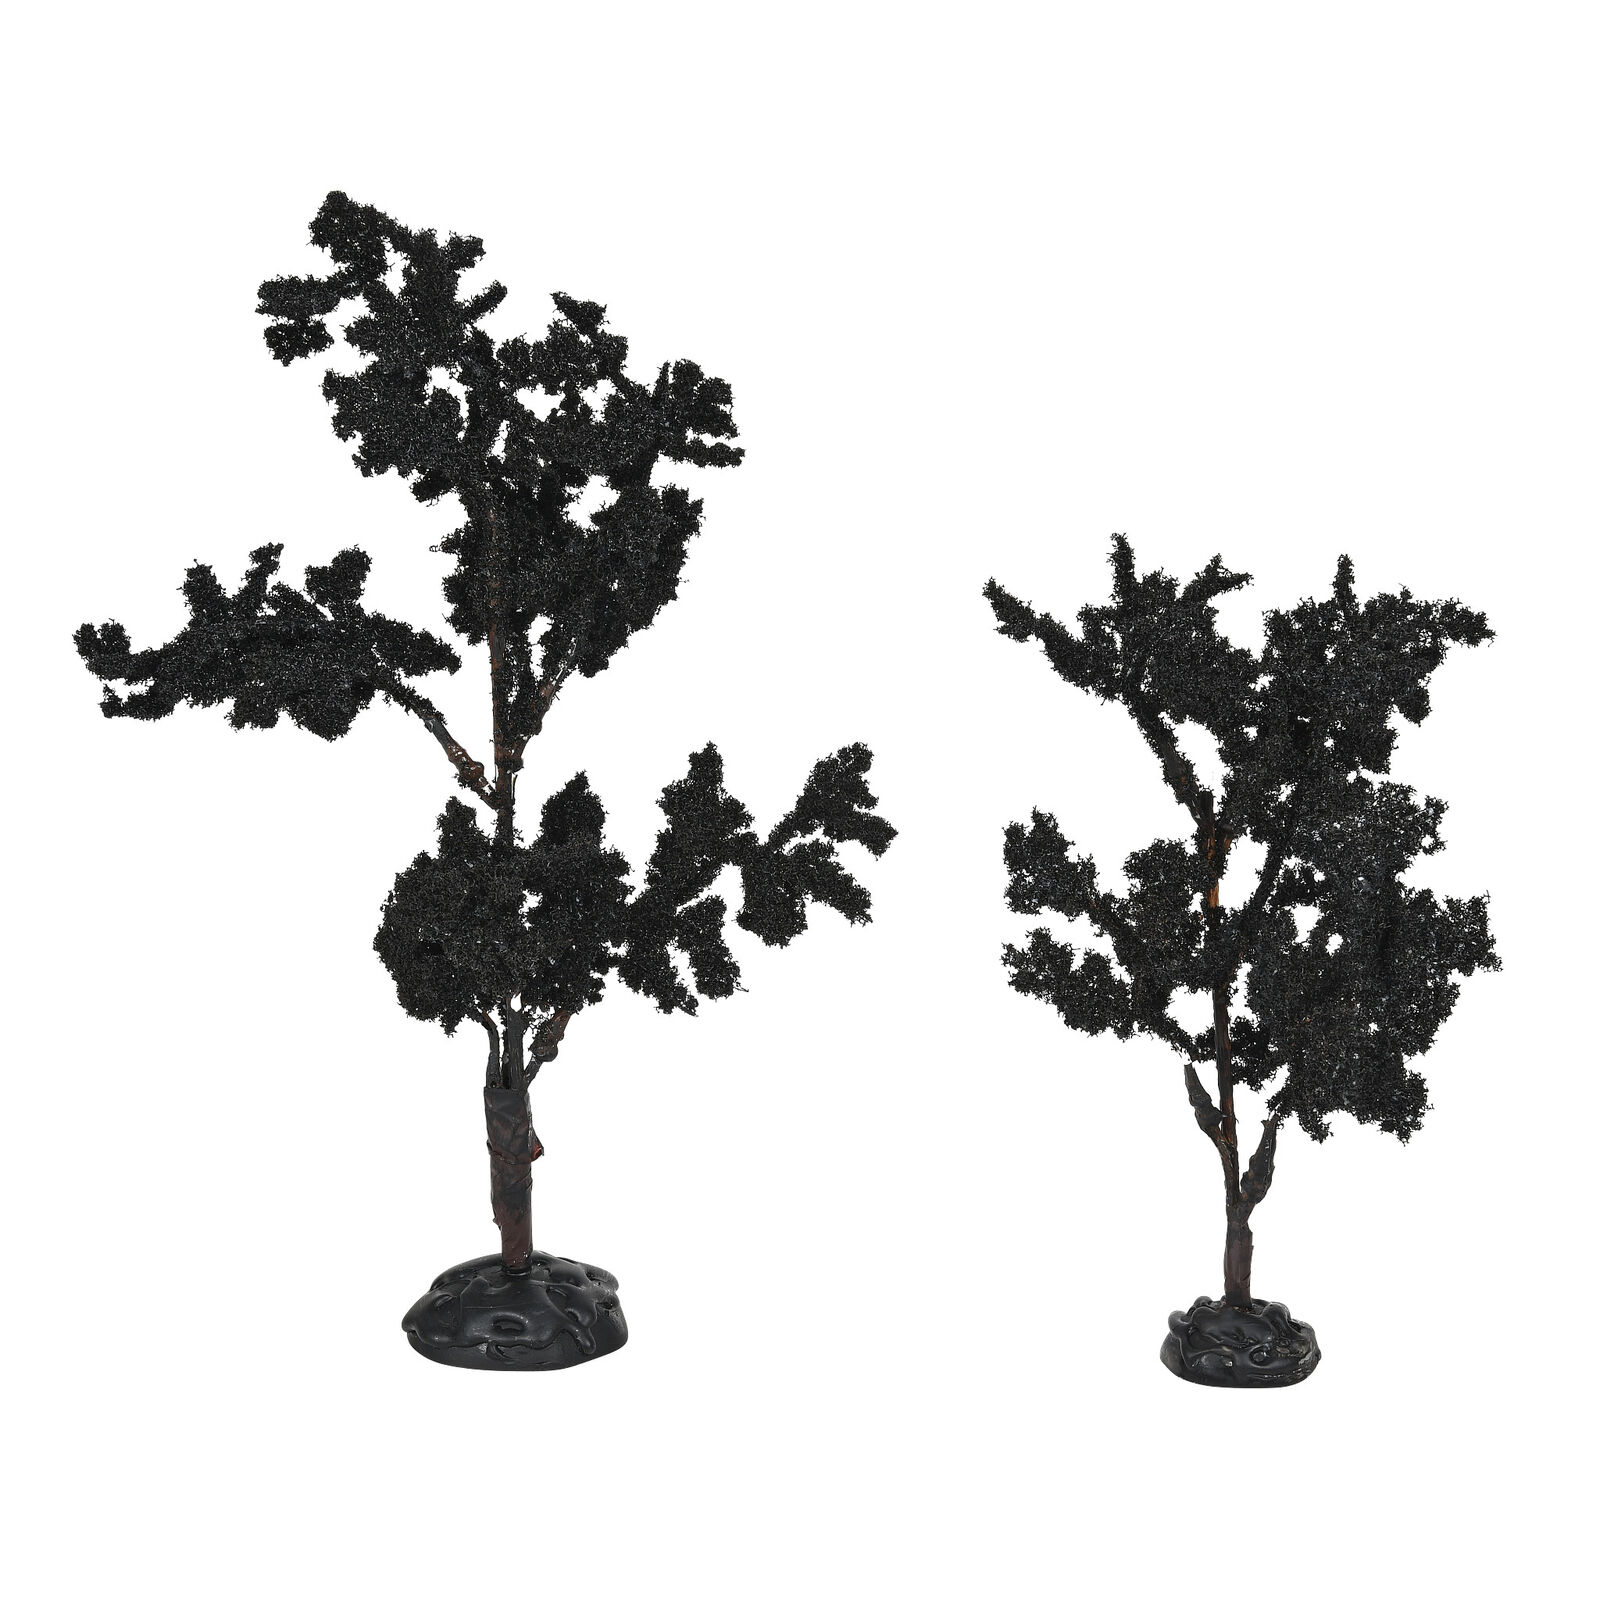 Department 56 Village Halloween Accessories the Forboding Trees Figurine Set